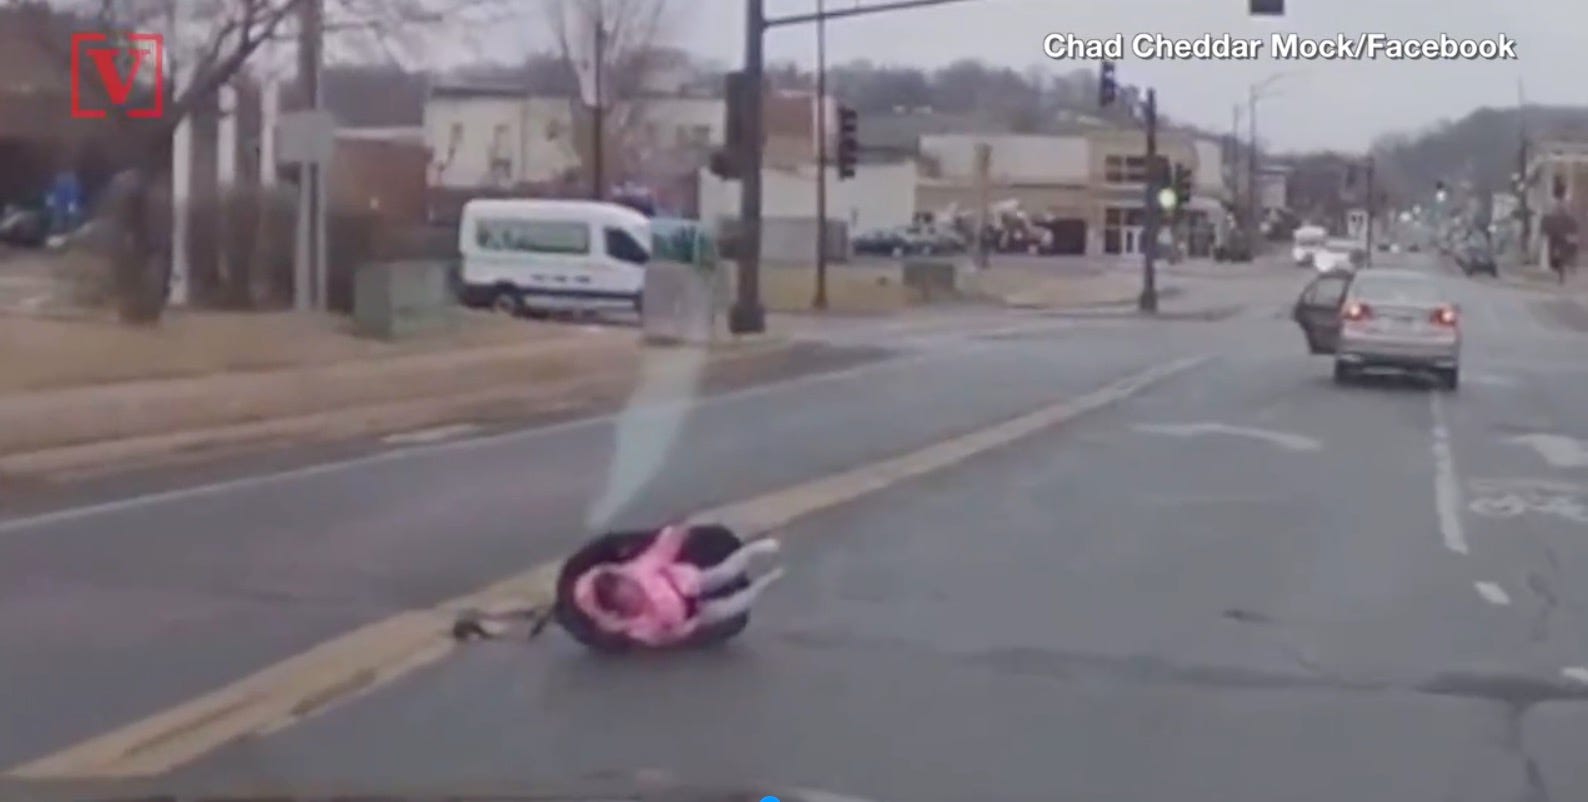 Toddler safe after fall from moving vehicle caught on video